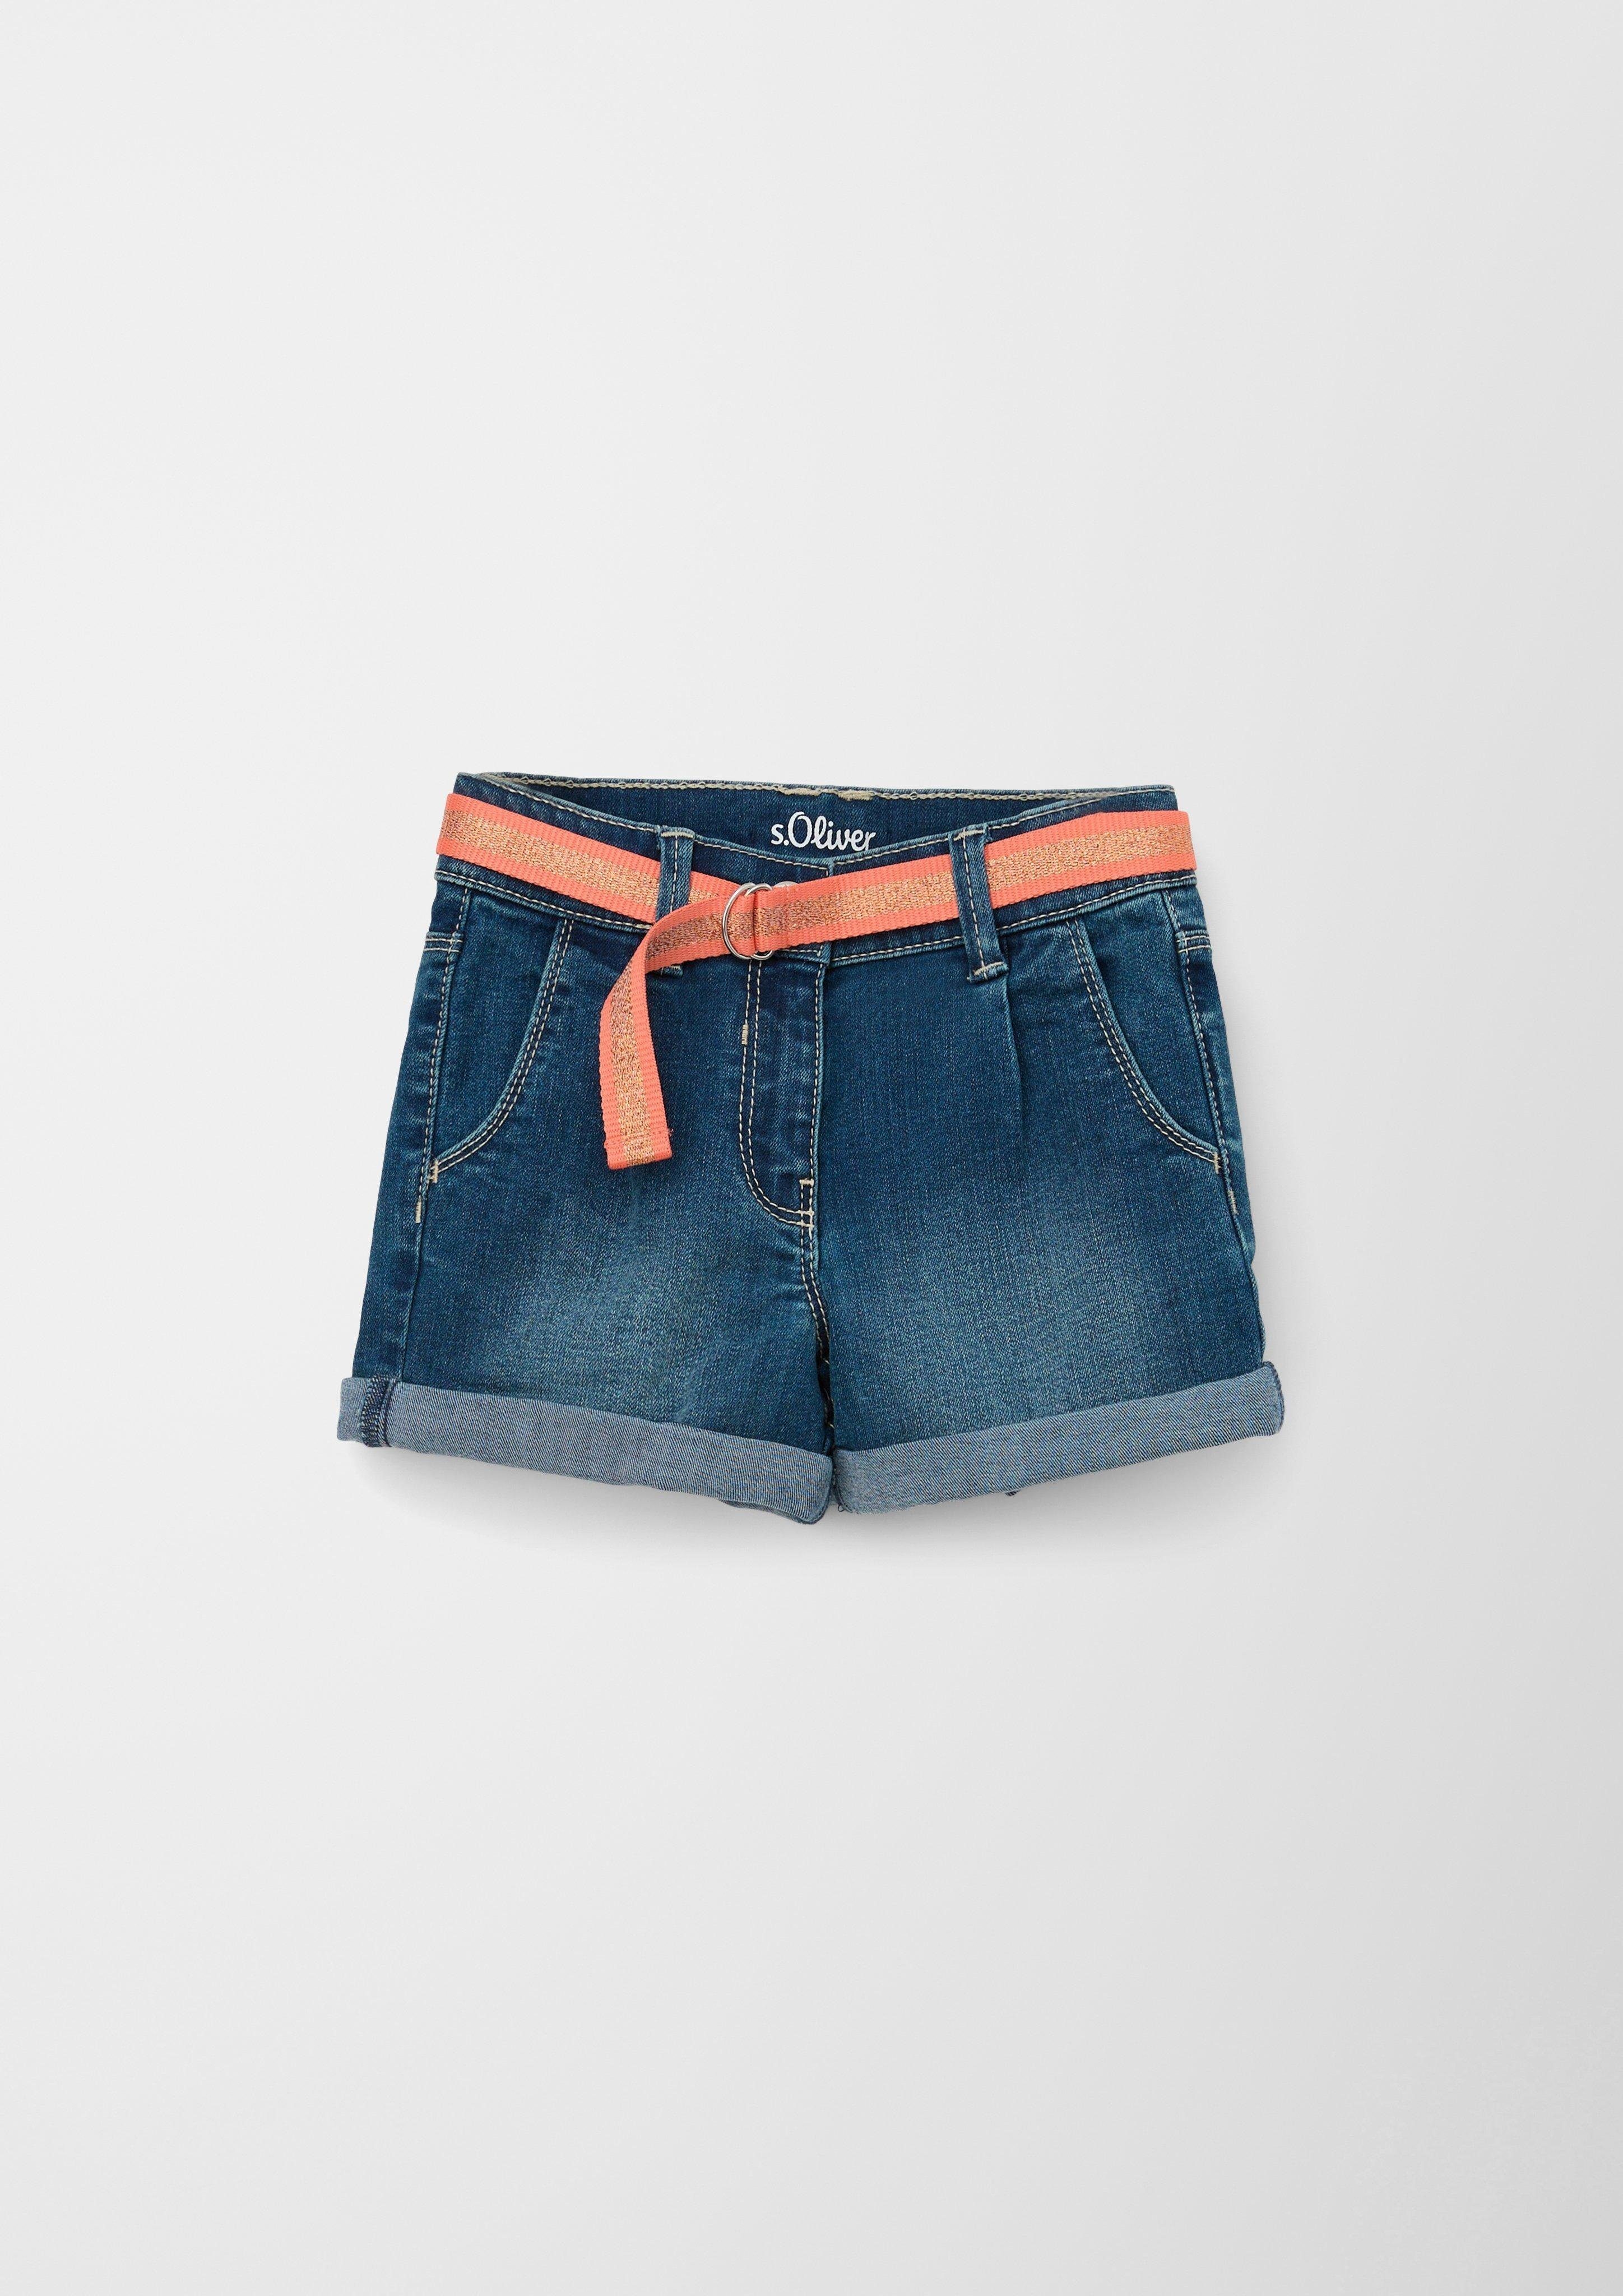 Fit s.Oliver Wide / Jeansshorts / Rise Waschung High Loose Jeans-Shorts / Leg